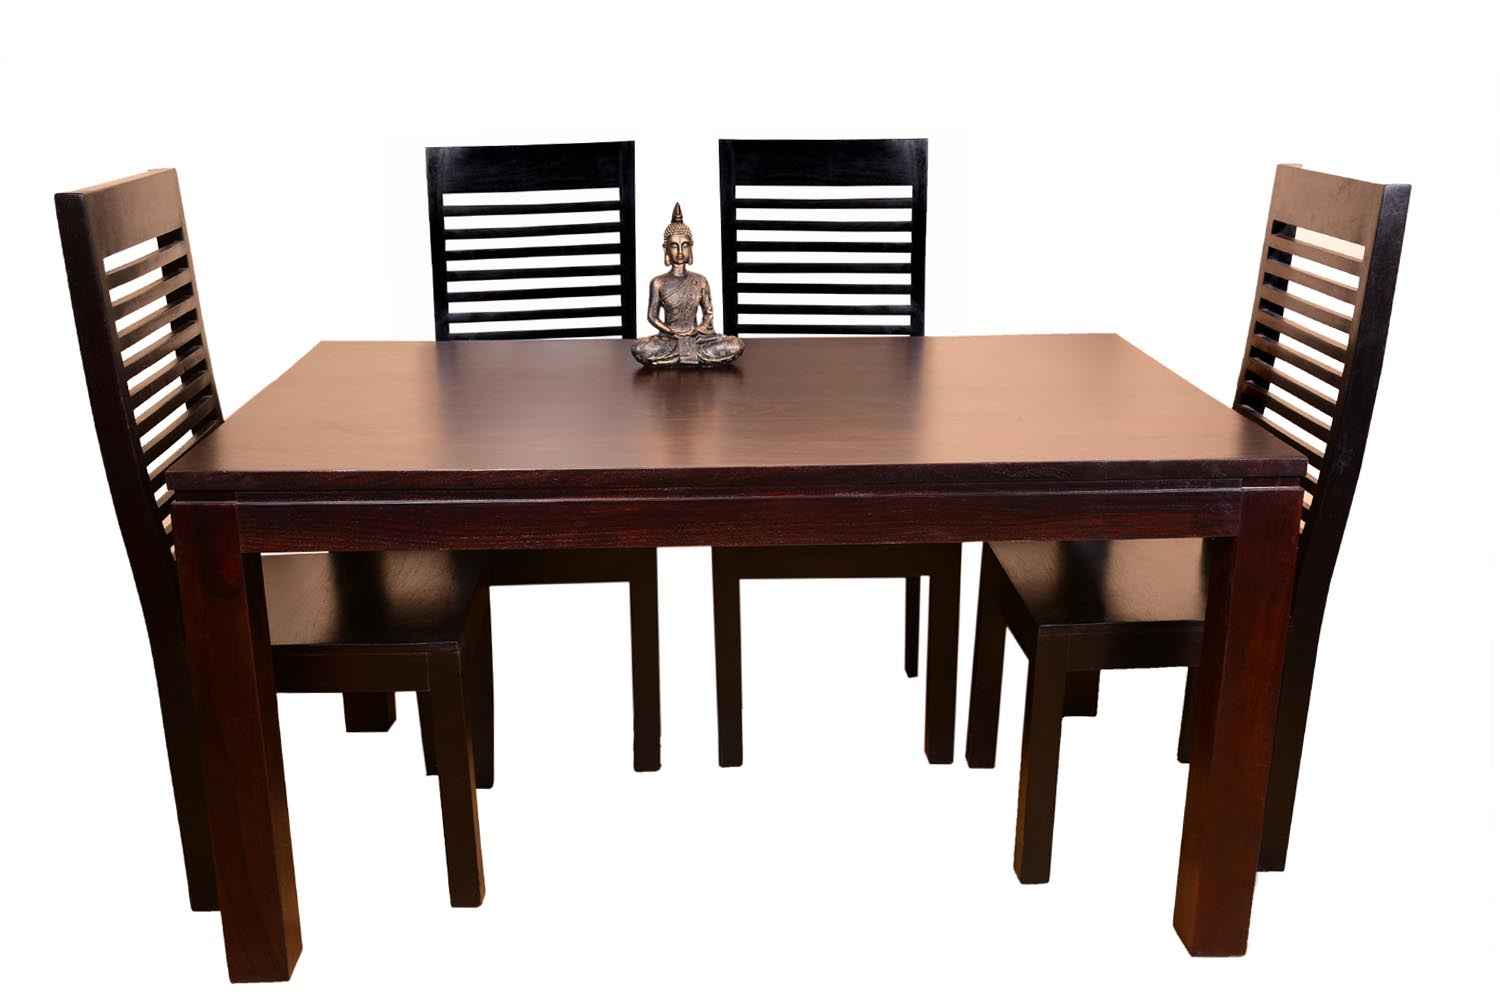 Buy 6 Seater Classic Dining Table Set Small Size Dining Room 6 Seater Dining Table Sets Furniture